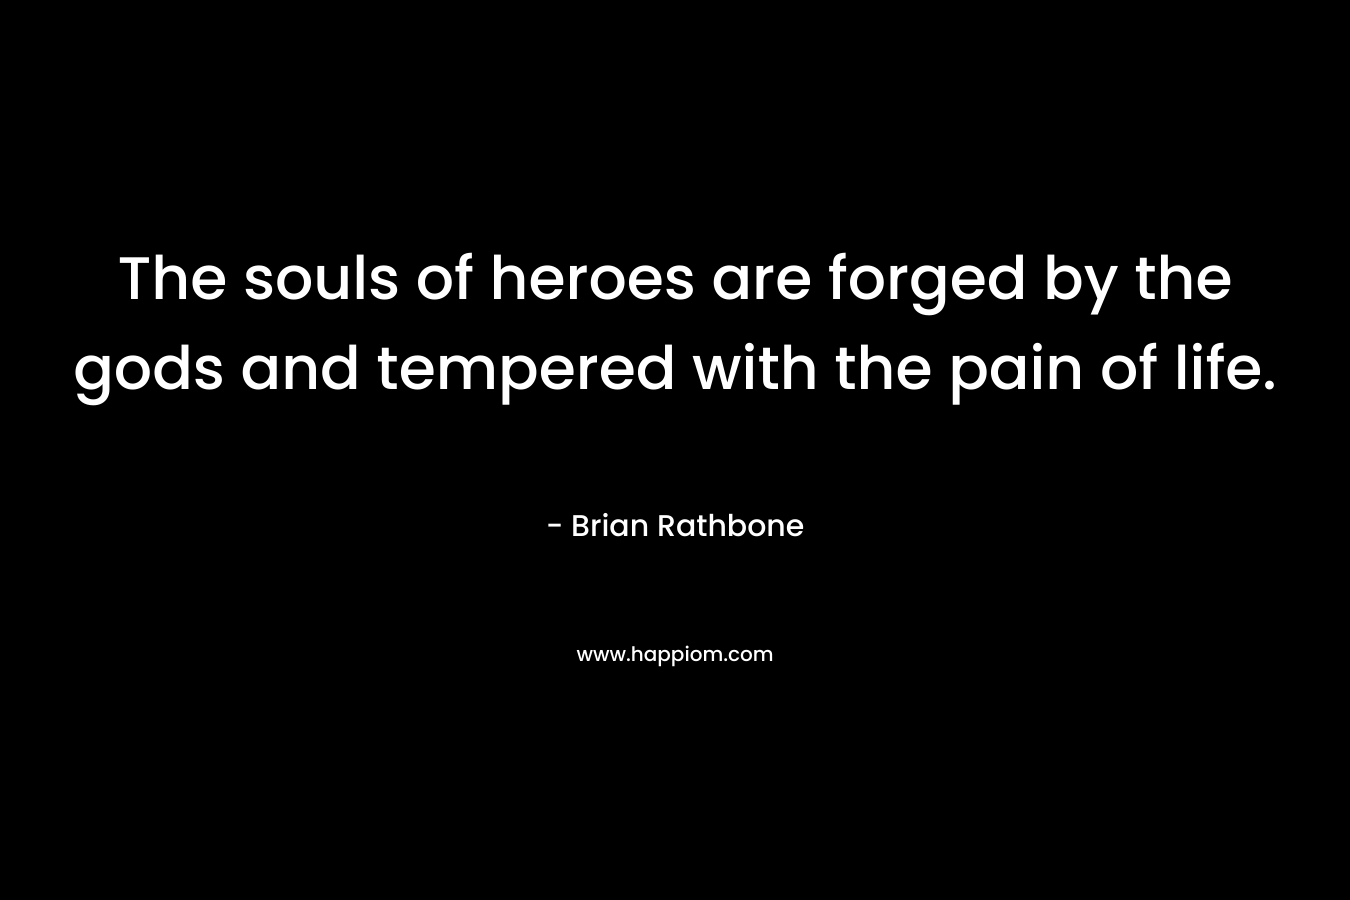 The souls of heroes are forged by the gods and tempered with the pain of life. – Brian Rathbone